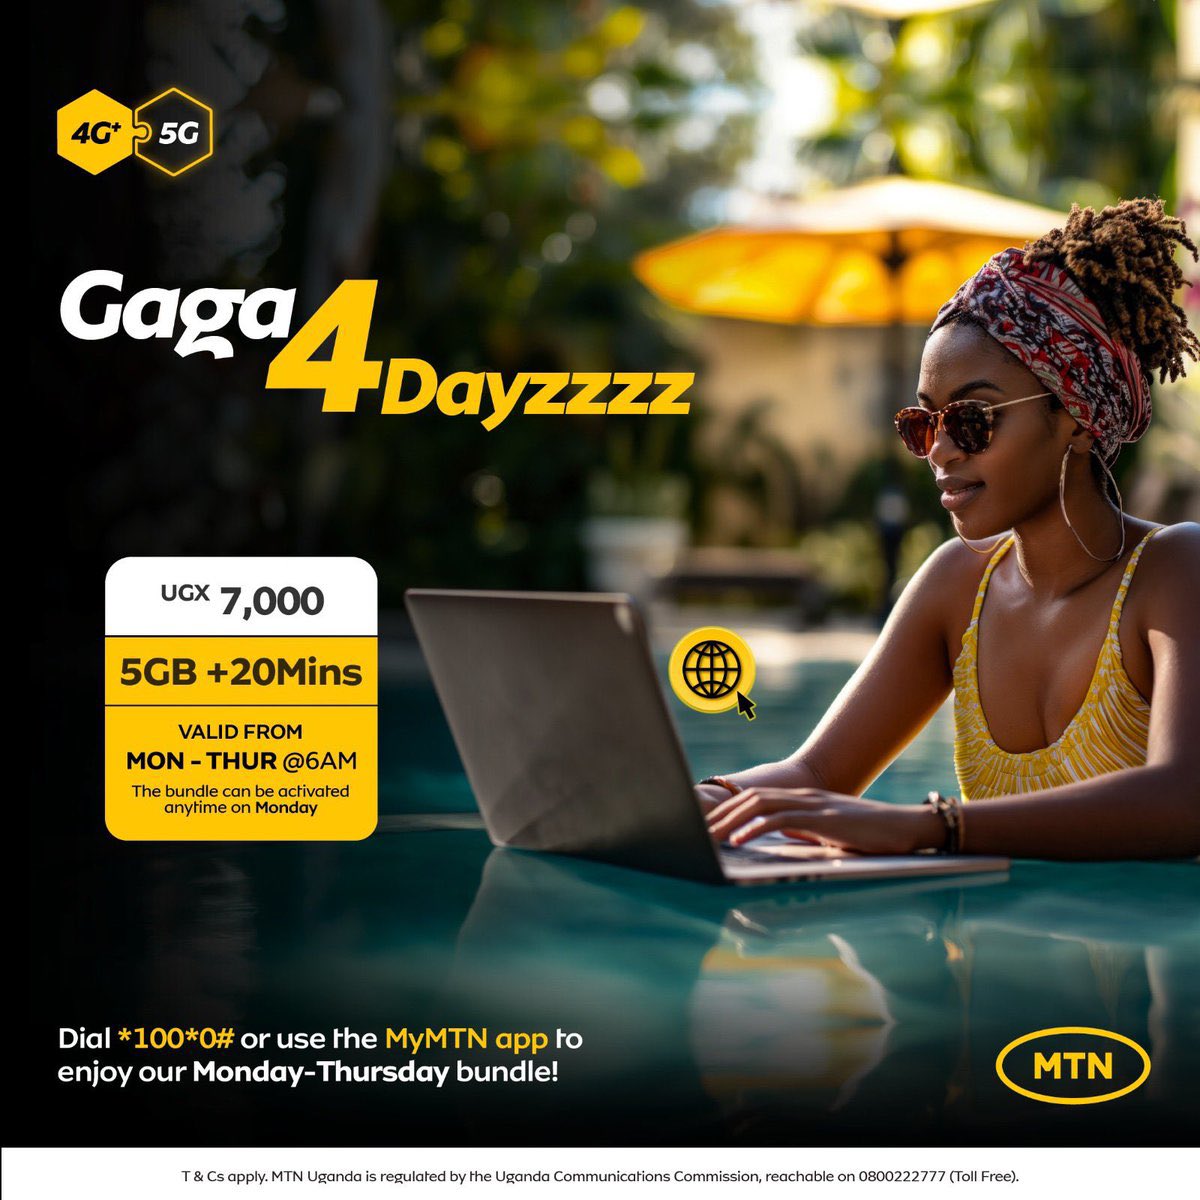 New week, new bundle! 
Get #Gaga4Dayzzzz for only 7k and enjoy 5GB of data + 20 minutes of talk time valid until Thursday 6AM. 

Dial *100*0# or use the #MyMTN App to activate ⚡️

 #TogetherWeAreUnstoppable